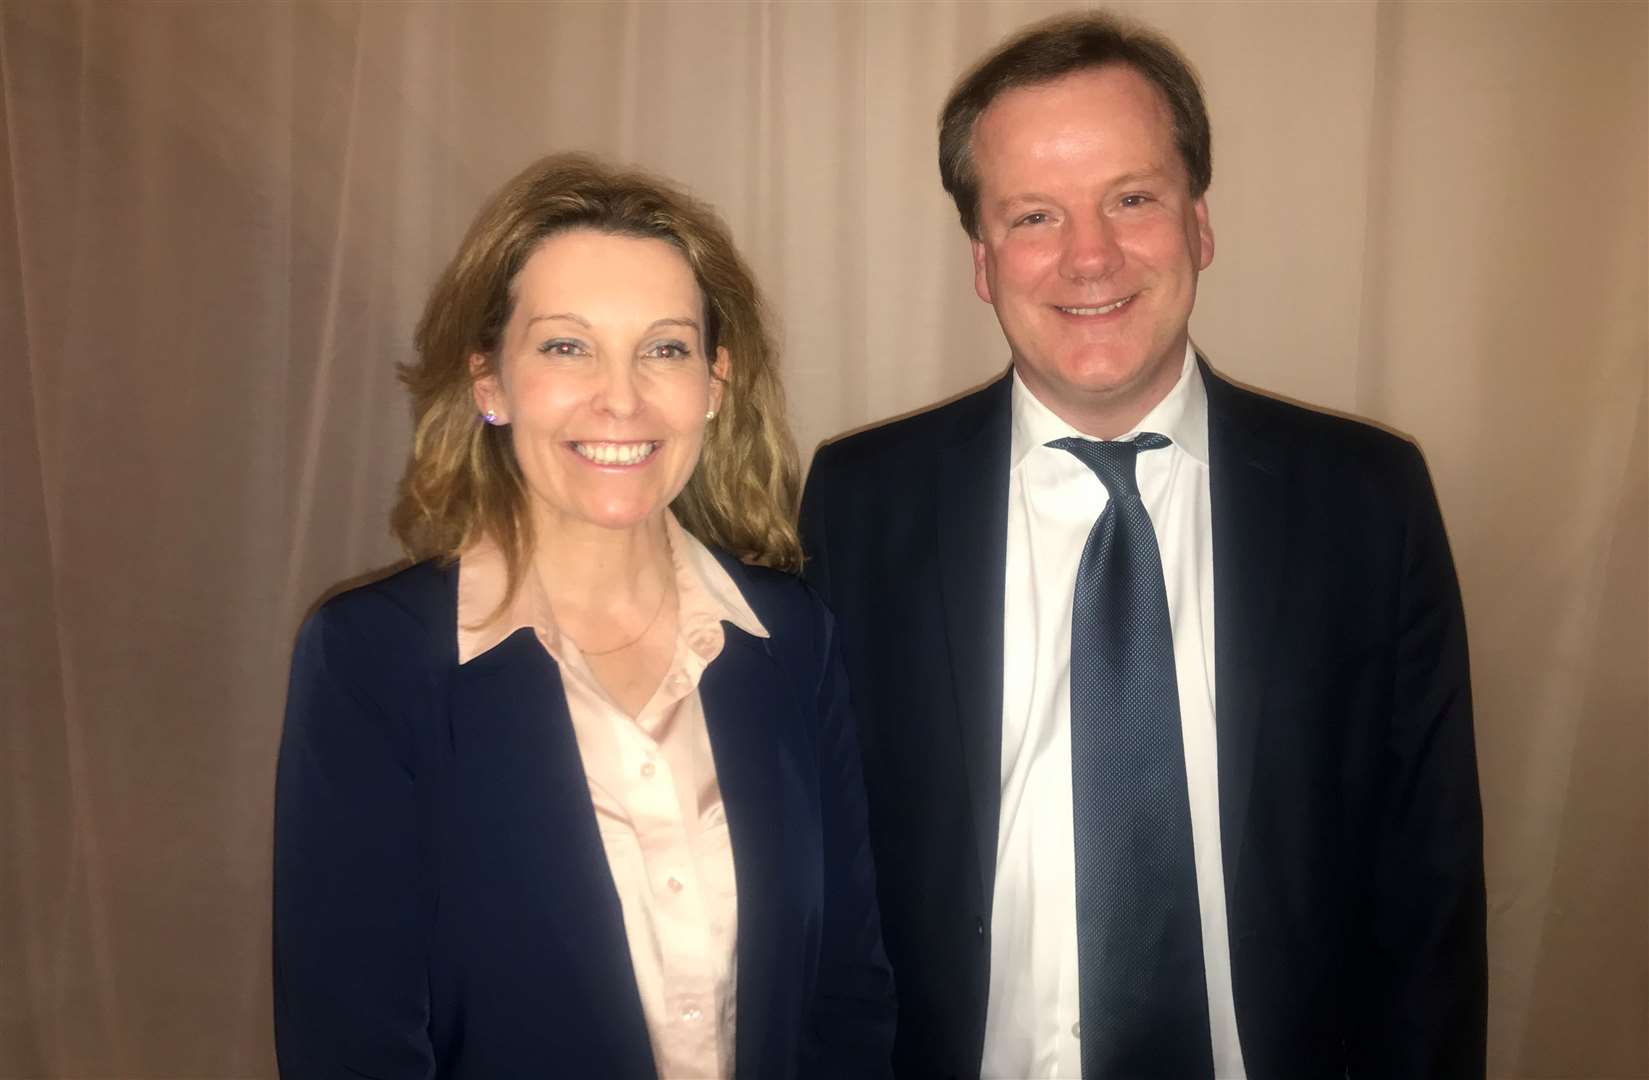 Natalie Elphicke with ex-husband Charlie, who she succeeded as MP for Dover and Deal